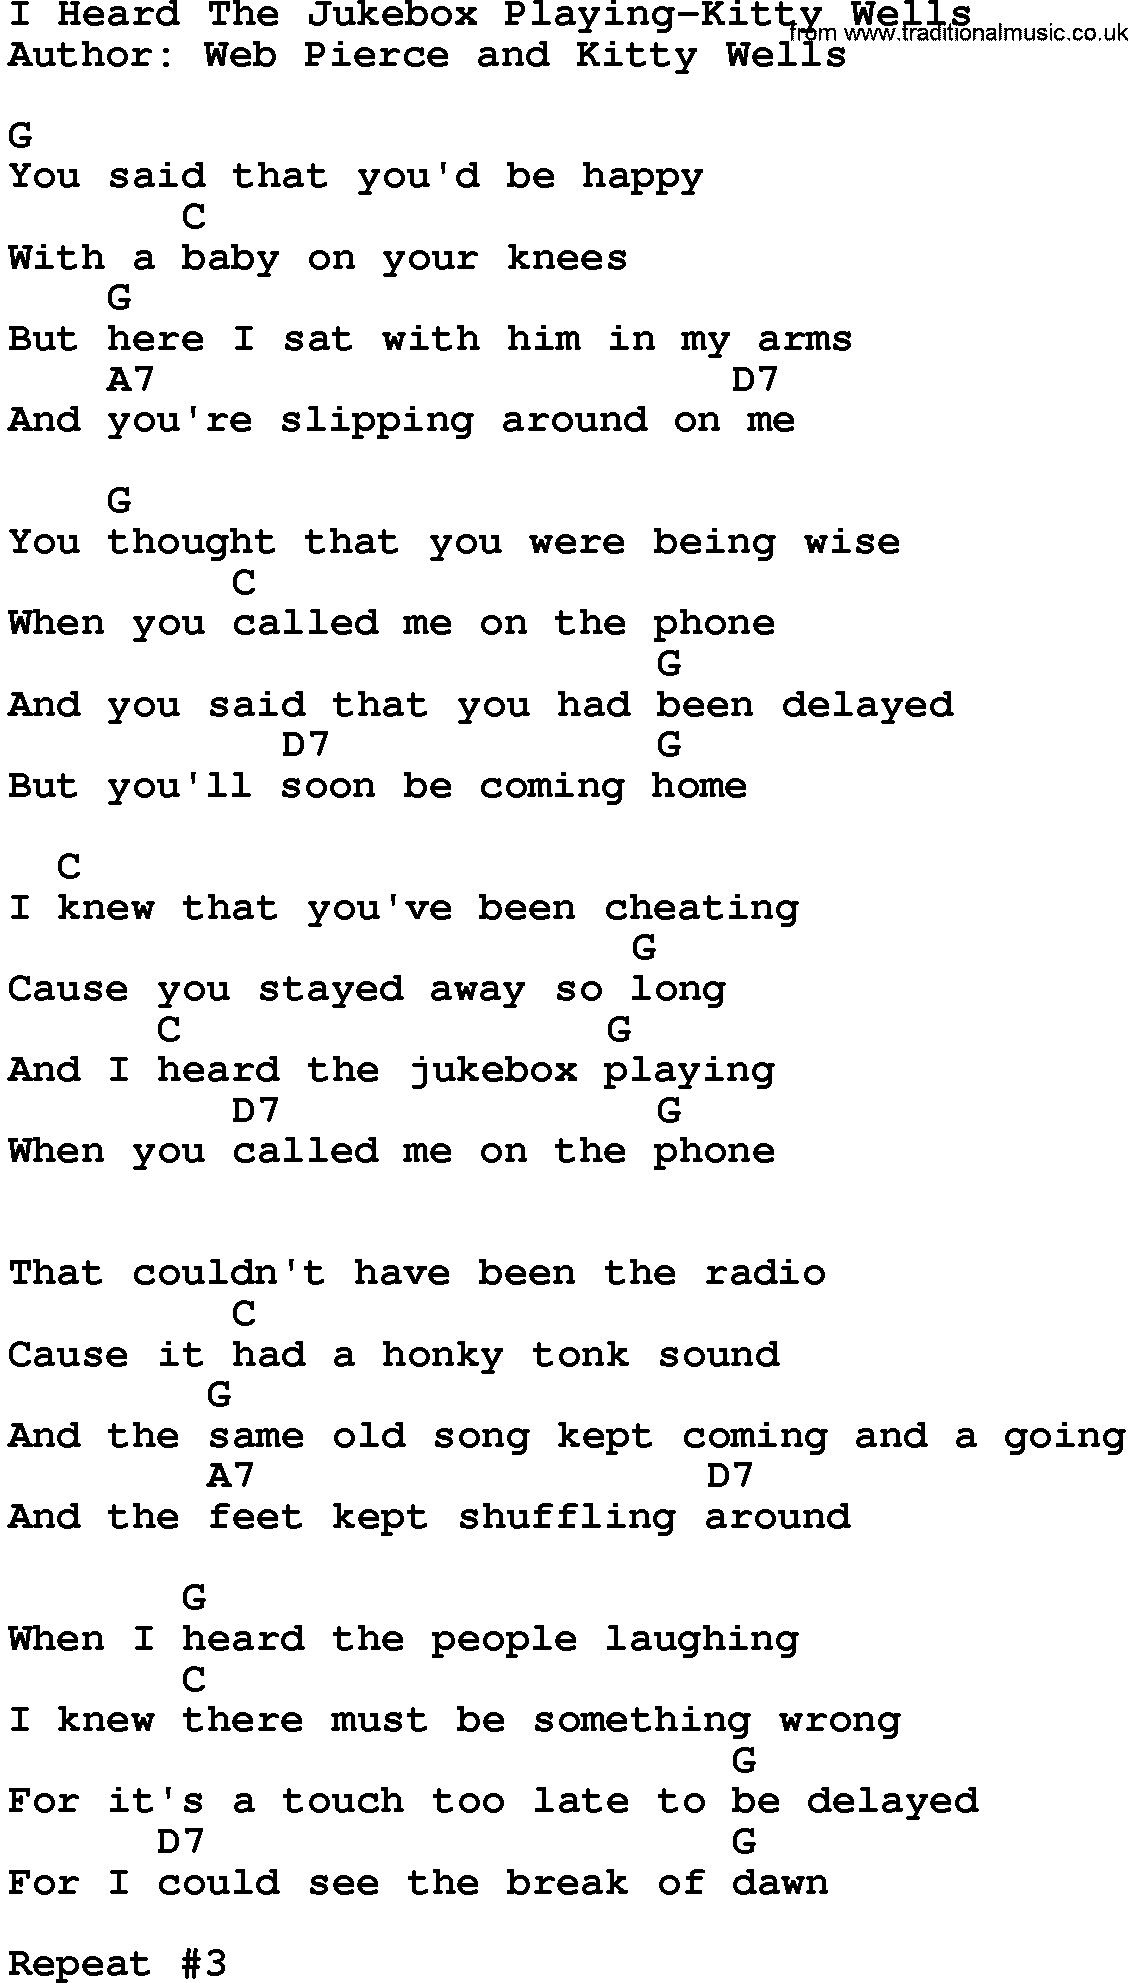 Country music song: I Heard The Jukebox Playing-Kitty Wells lyrics and chords